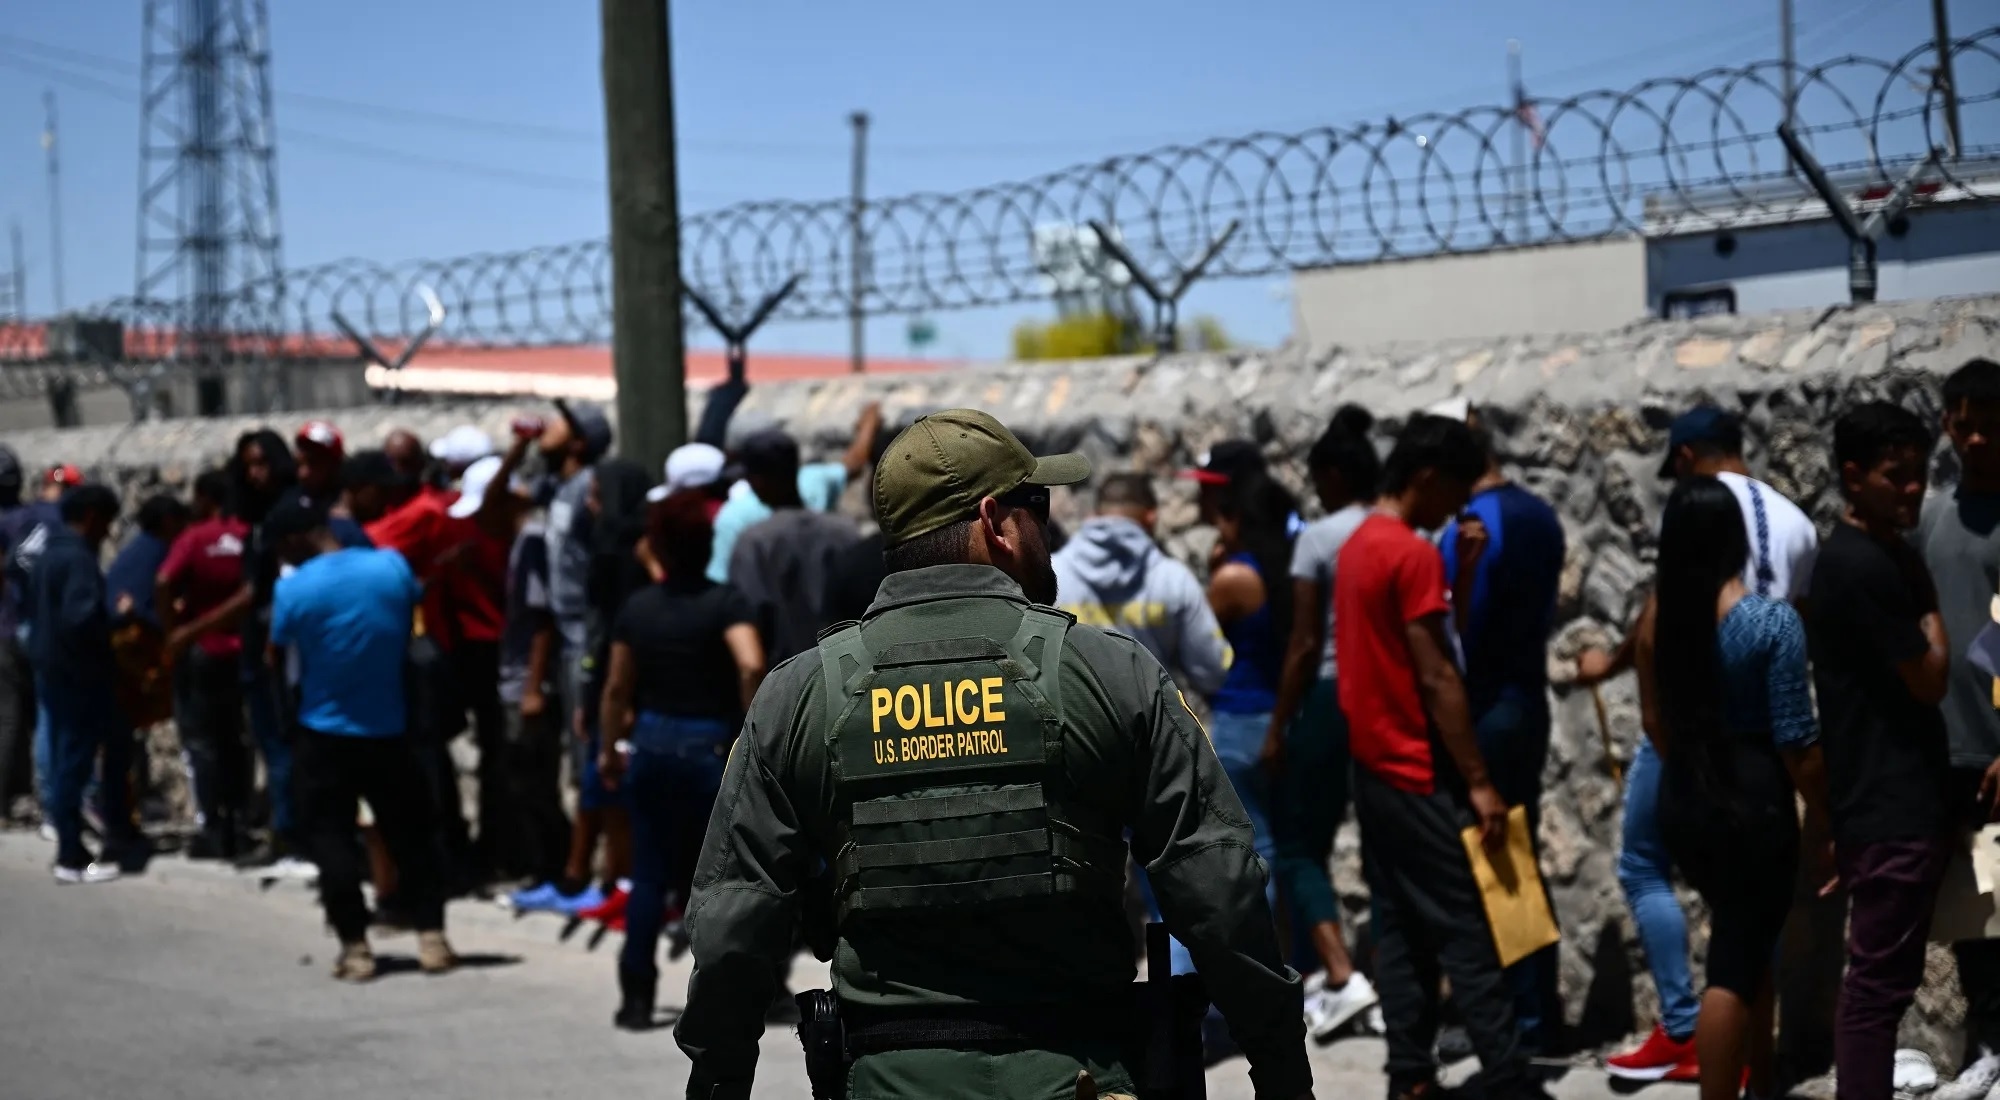 CBP denies that a border agent allowed a group of immigrants to cross into the United States